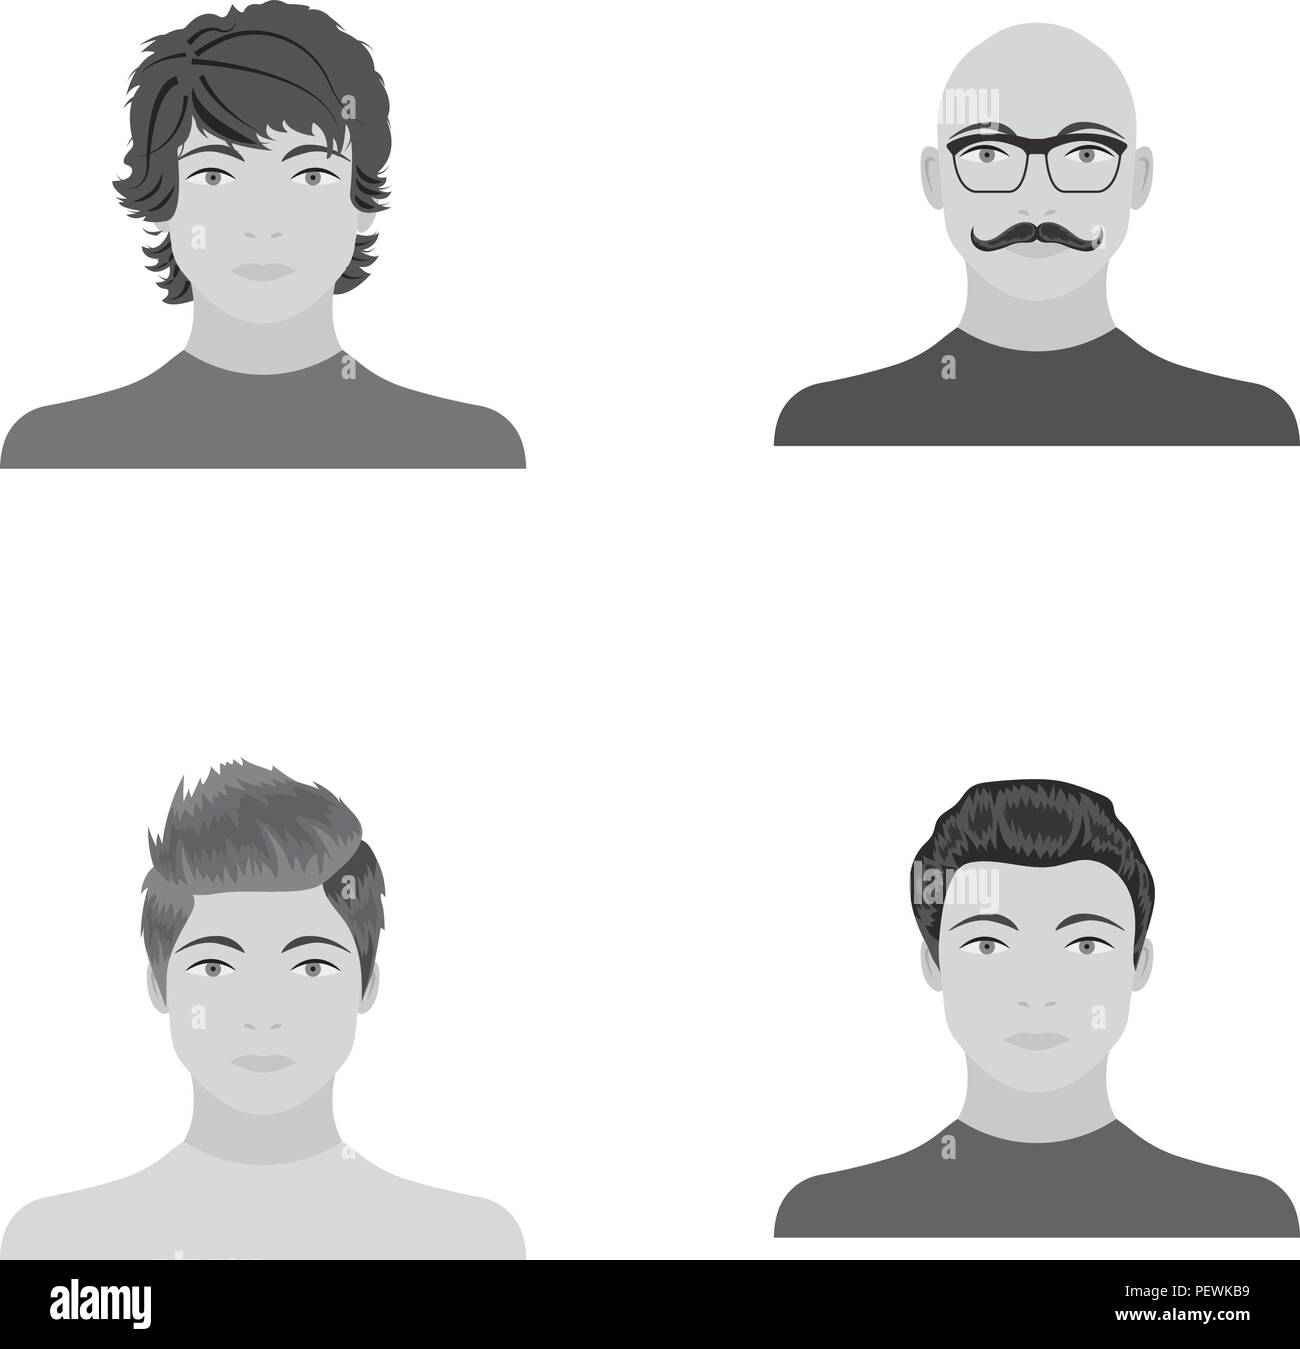 appearance,avatar,bald,boy,bust,coiffure,collection,exterior,face,glasses, guy,hair,haircut,hairdo,hairstyle ,head,icon,illustration,image,isolated,logo,male,man ,monochrome,mustache,person,portrait,set,sign,spectacles,style,symbol,vector,visage,web,young  ...